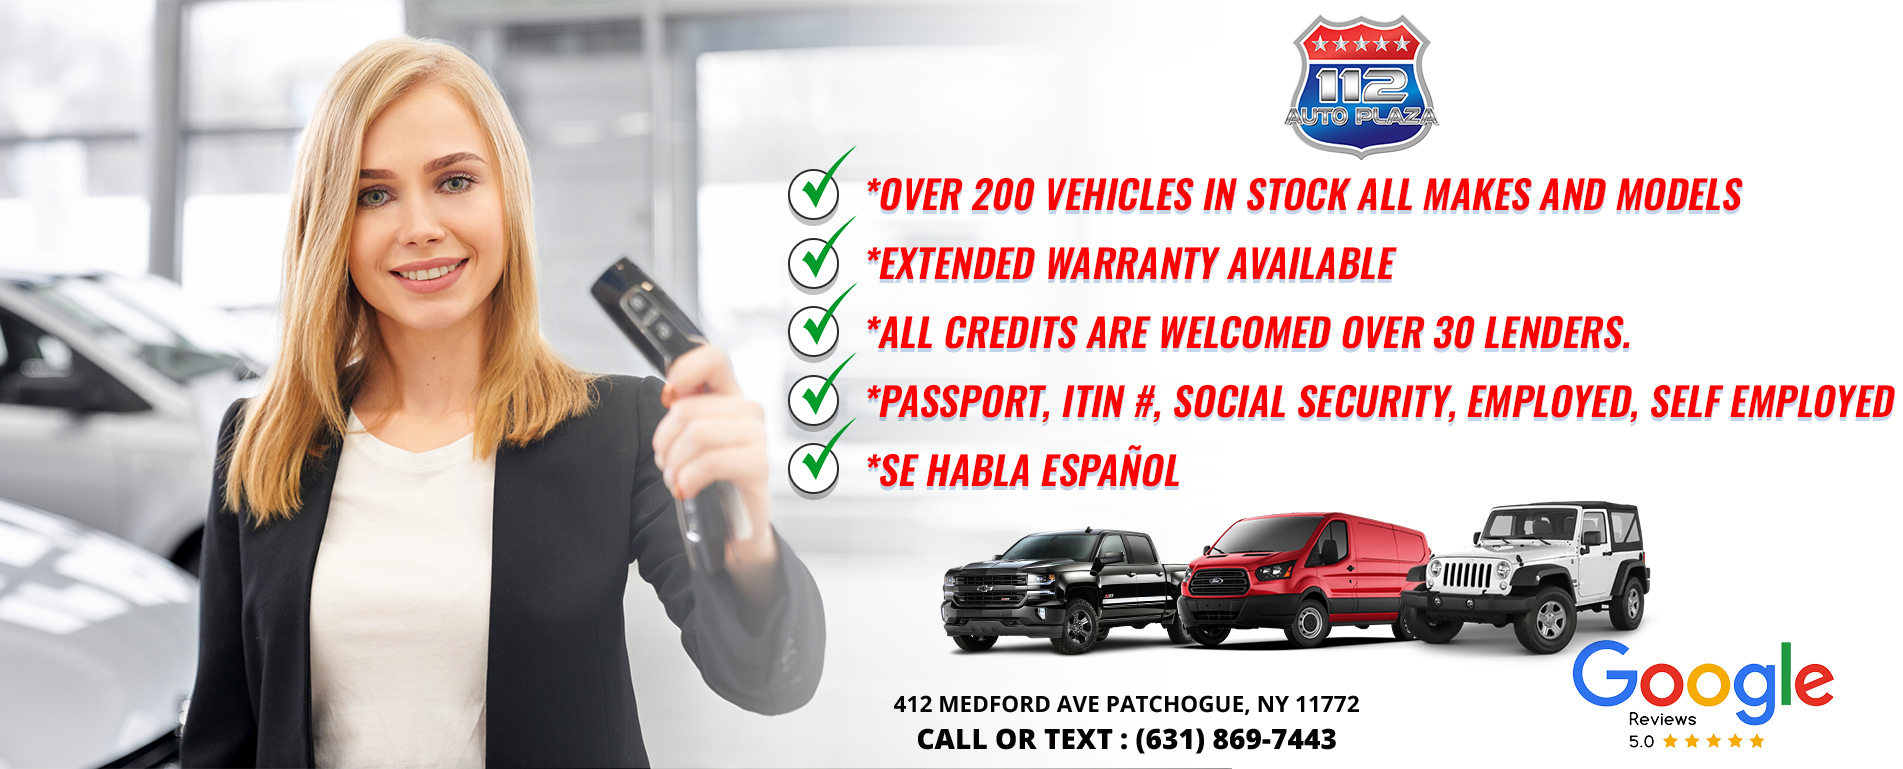 Used cars for sale in Patchogue | 112 Auto Plaza. Patchogue New York